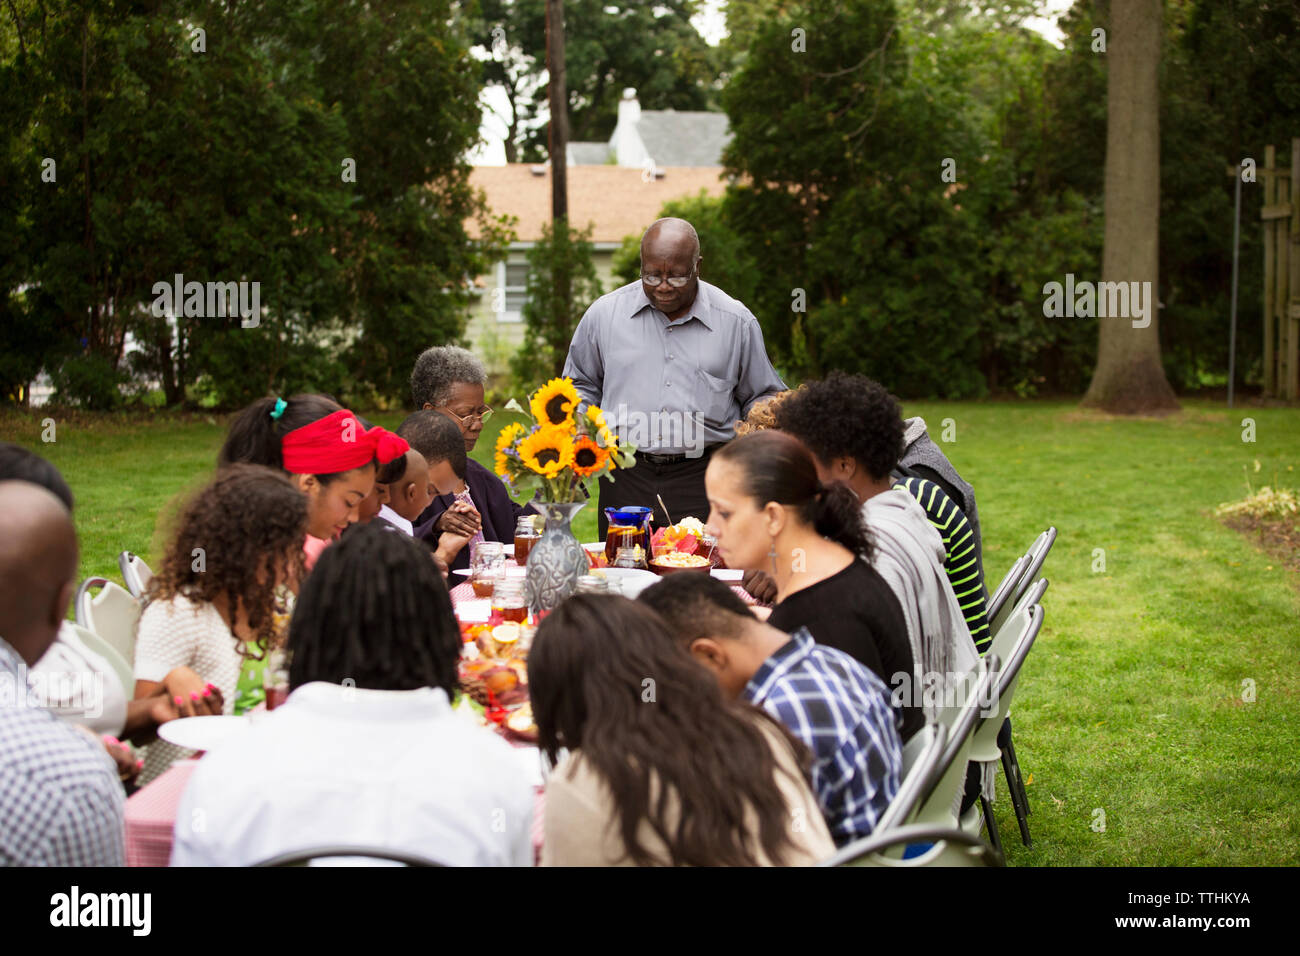 Family and friends having food at table in backyard Stock Photo